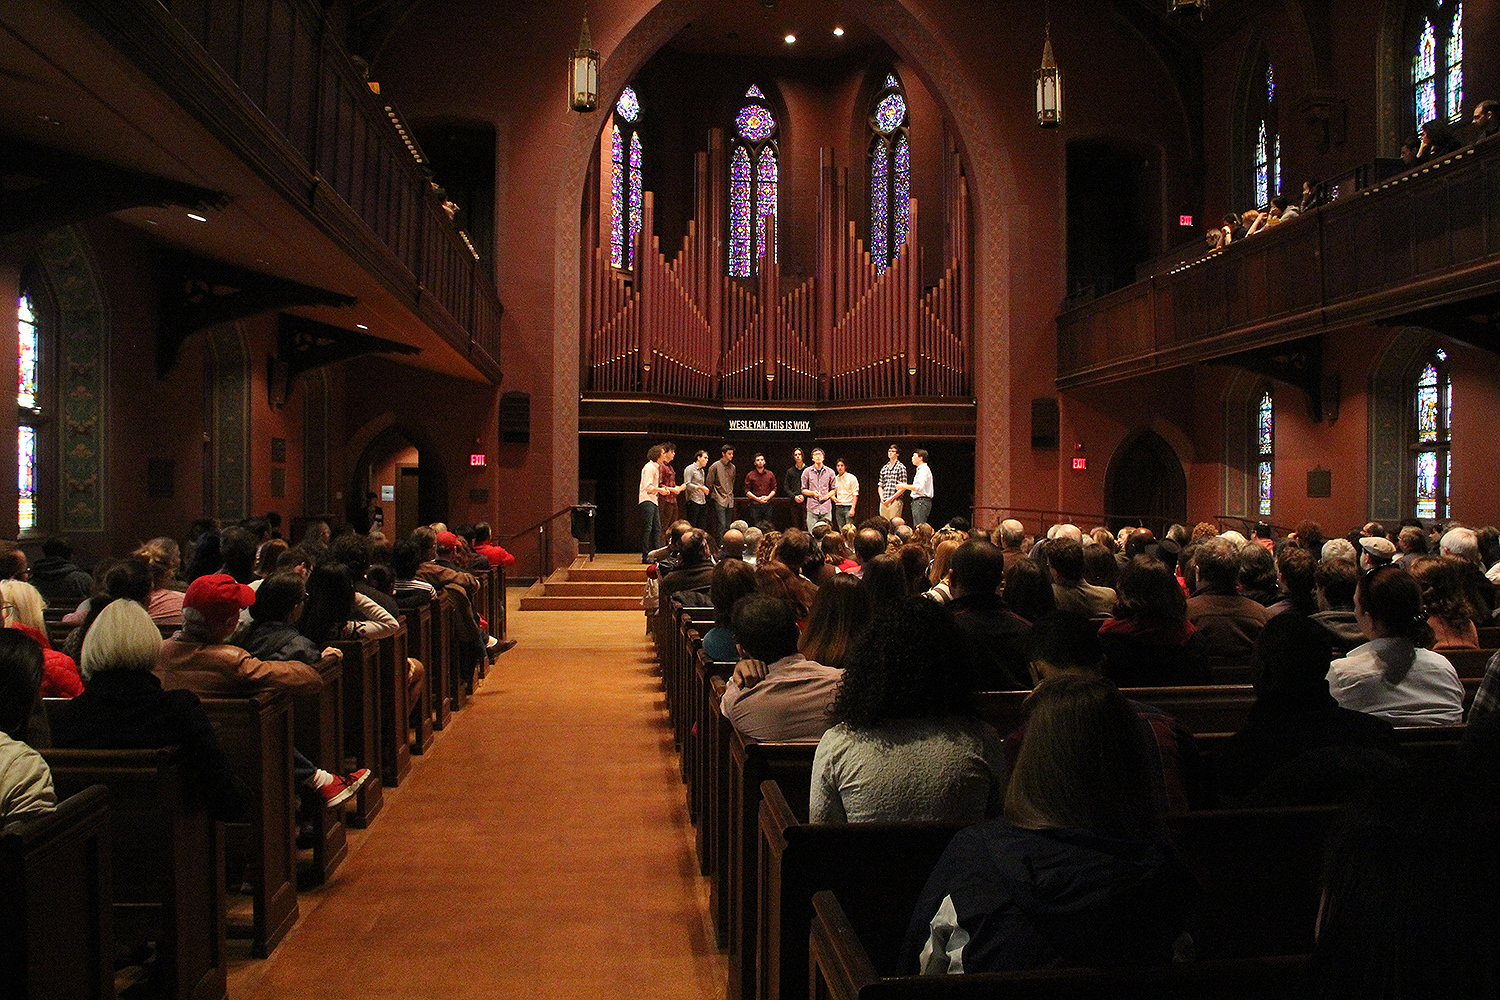 The 5th Annual Stone A Cappella Concert at Memorial Chapel on Nov. 8 featured the vocal talent of Wesleyan's many student a capella groups. (Photo by Rebecca Goldfarb Terry ’19)